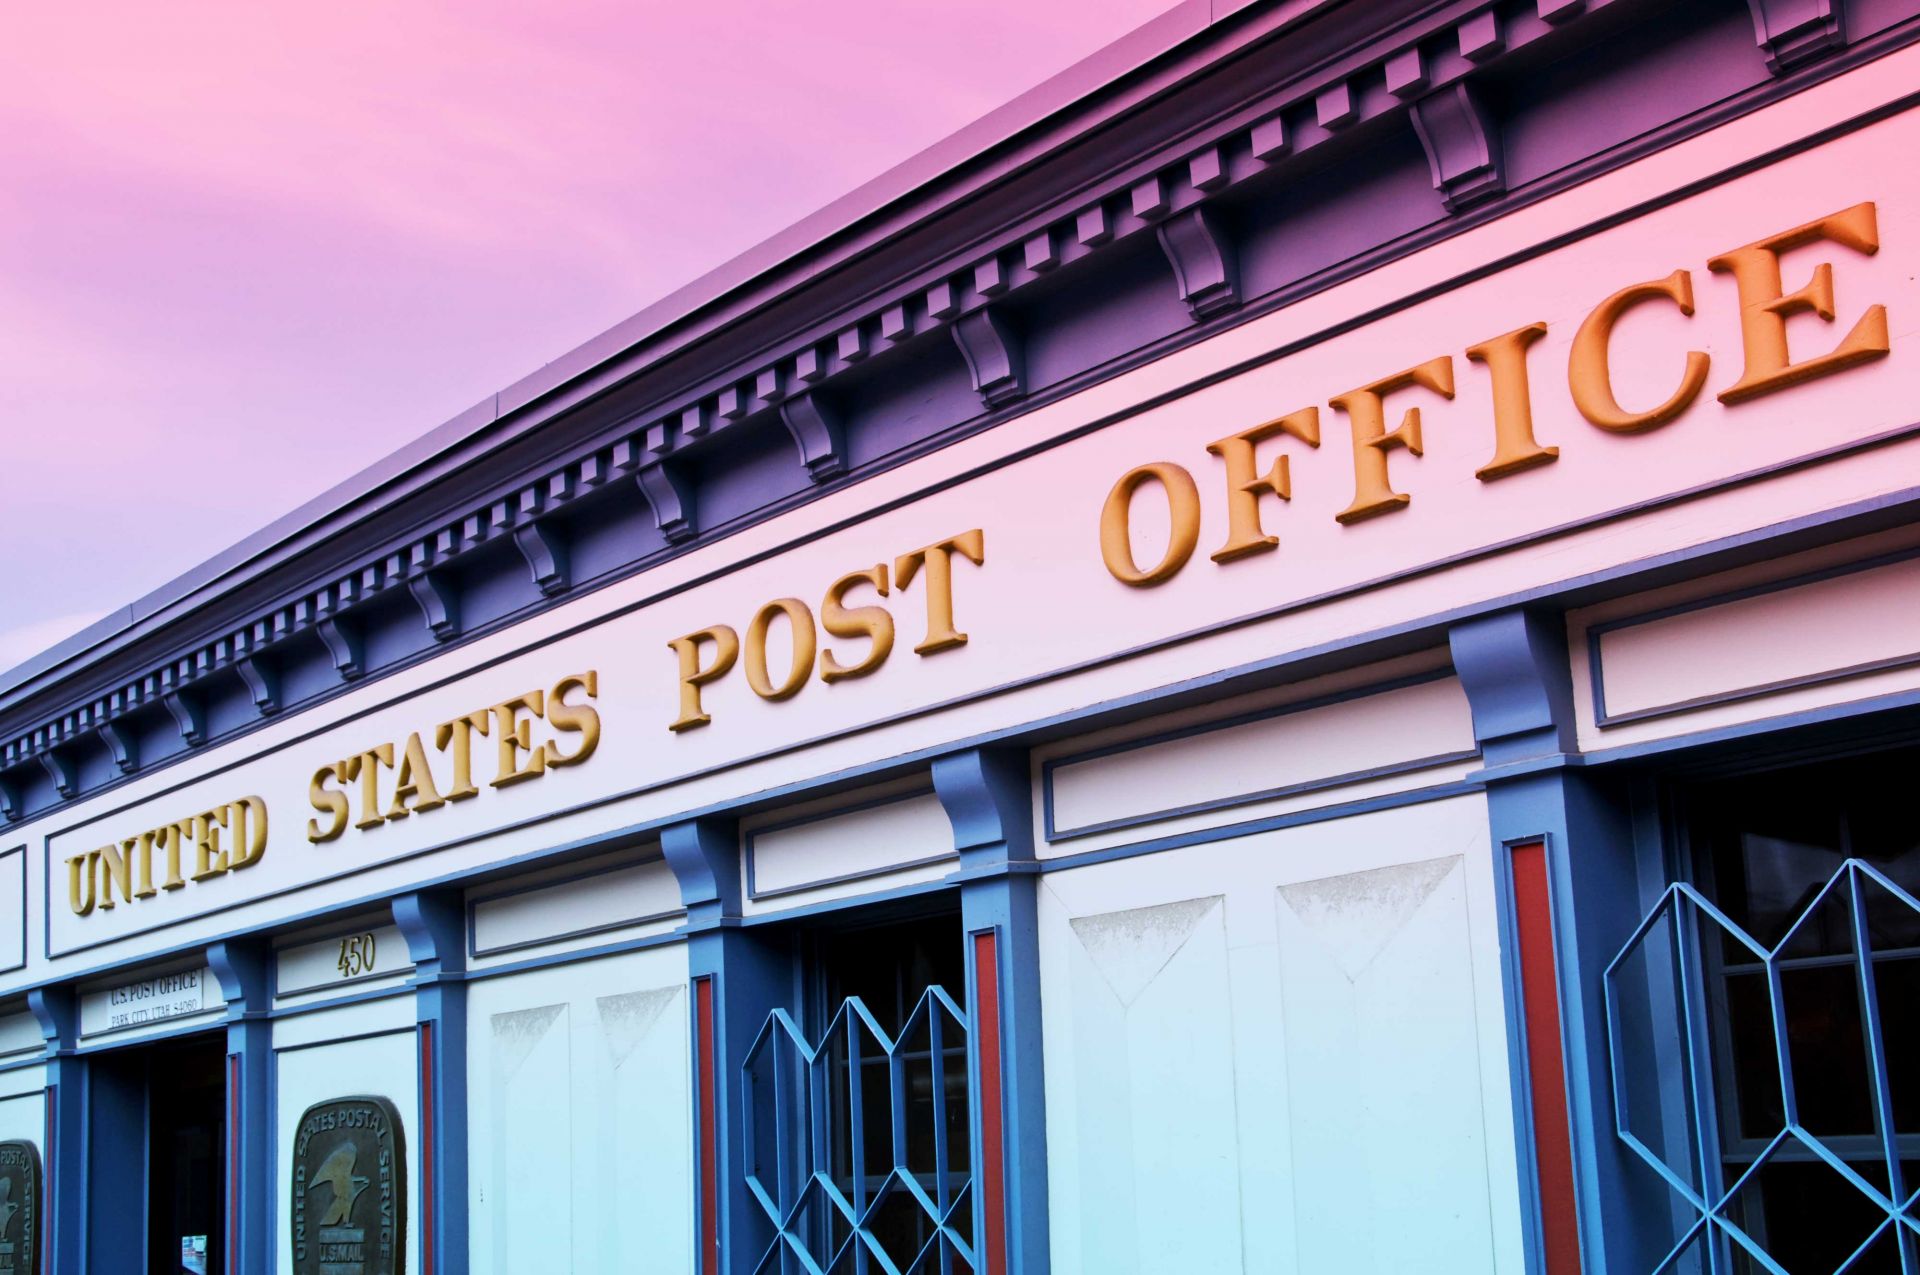 The Postmaster General of the United States is the second highest paid government official after the President.